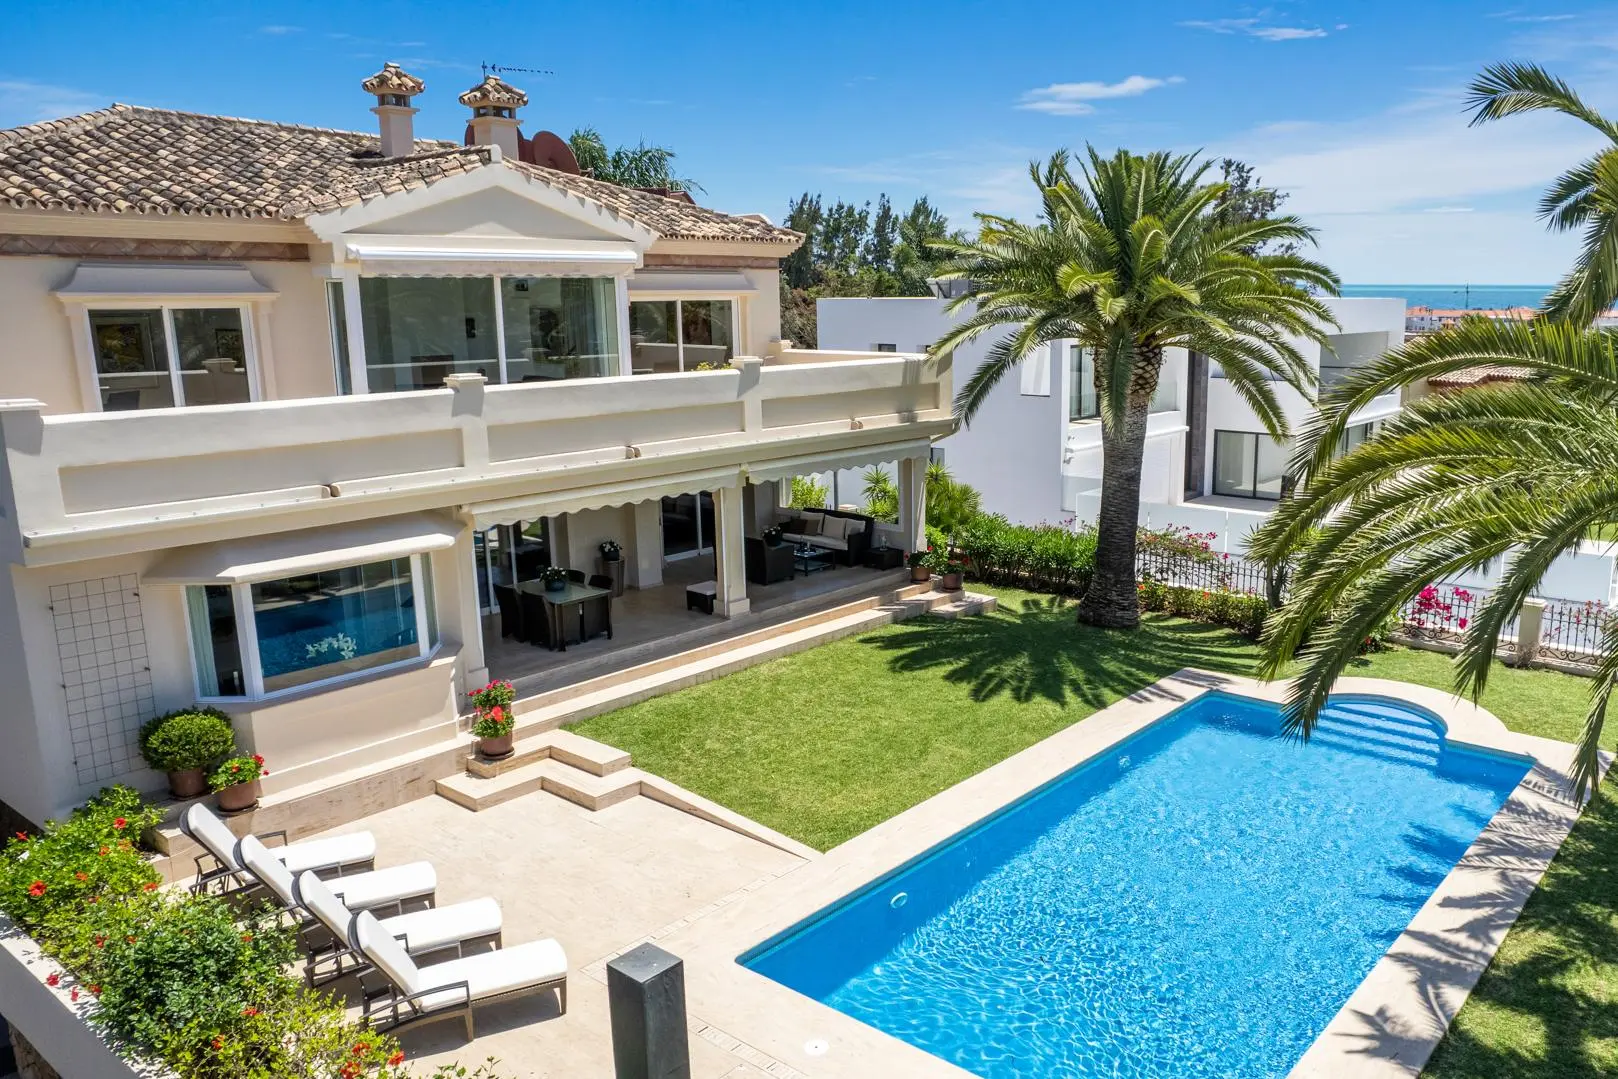 Enjoyable vacation time with luxury homes in Marbella